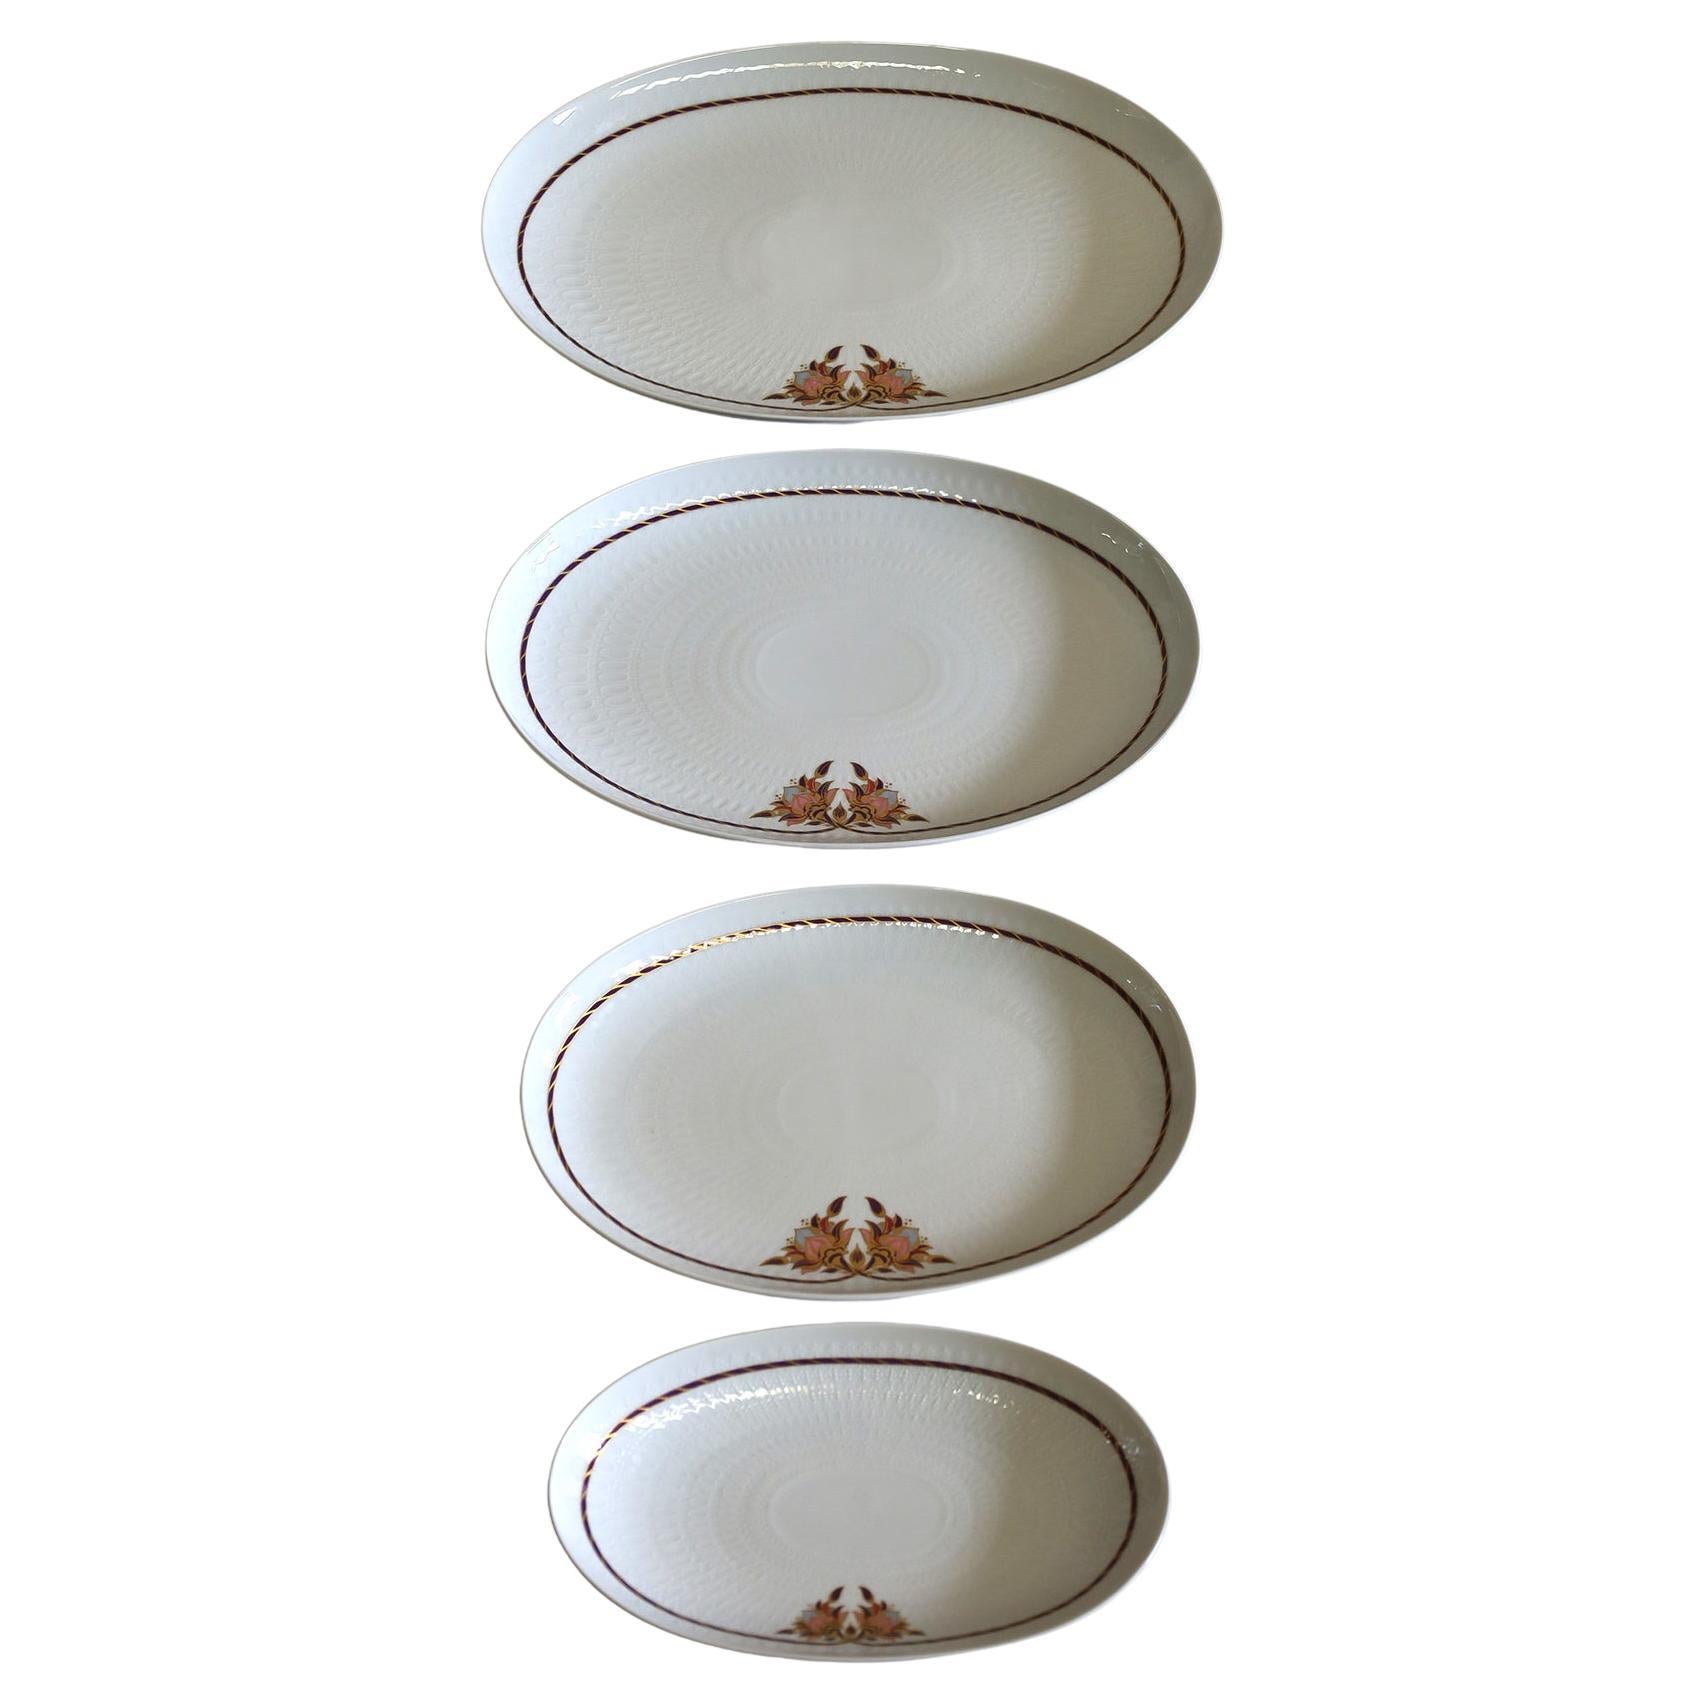 Set of 4 Vintage Rosenthal Classic Rose Platters, never used still with the Rosenthal paper tag.
Very elegant. 

Sizes:

38 x 26 cms
34 x 24 cms
29 x 20 cms
25 x 14 cms